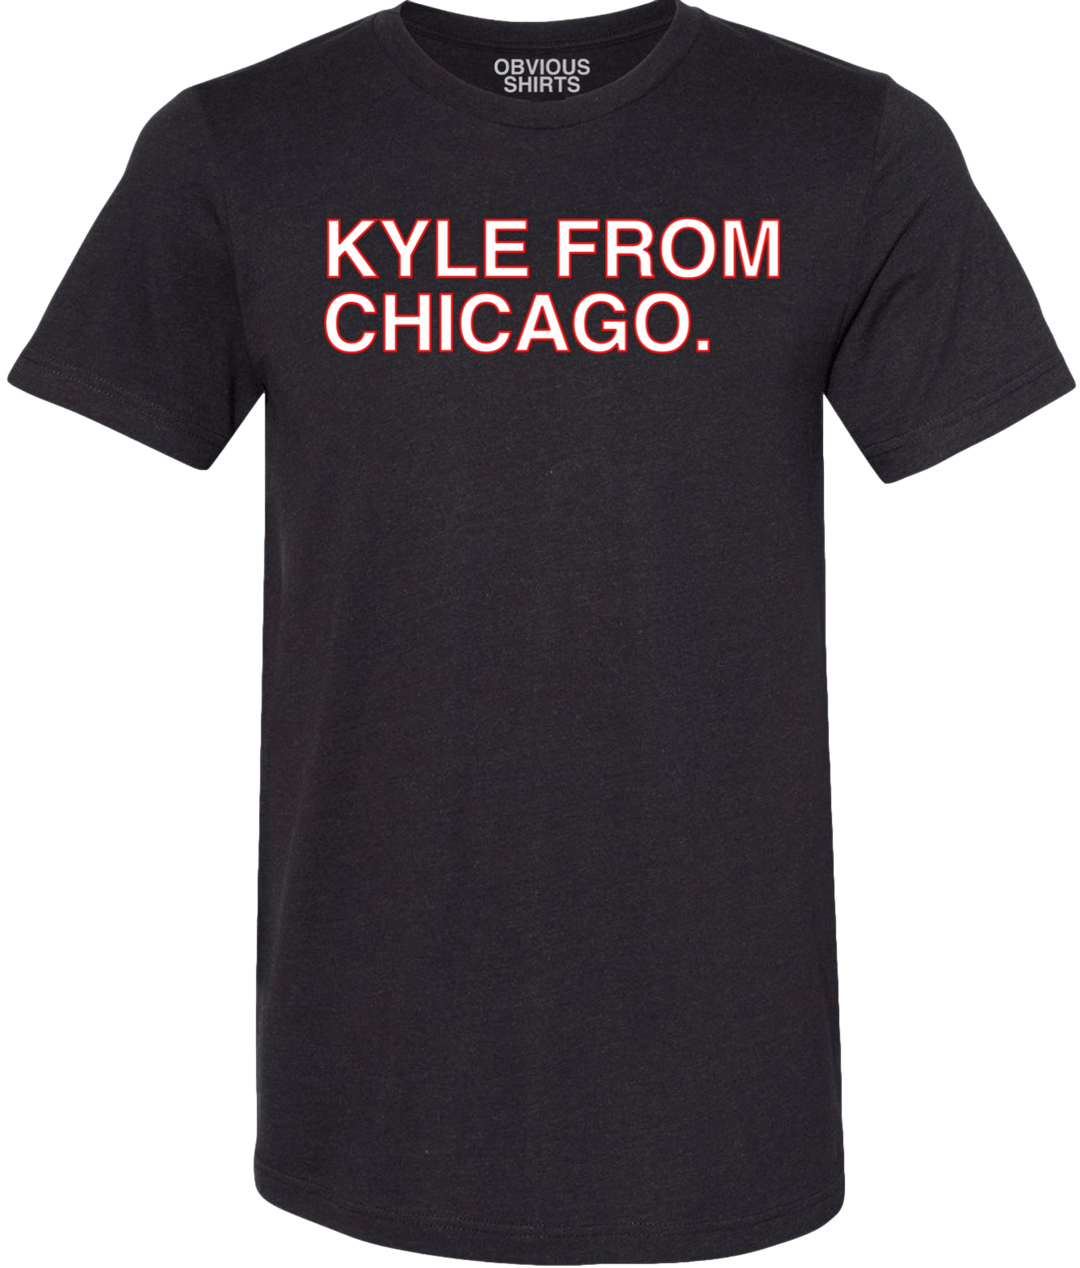 KYLE FROM CHICAGO. - OBVIOUS SHIRTS